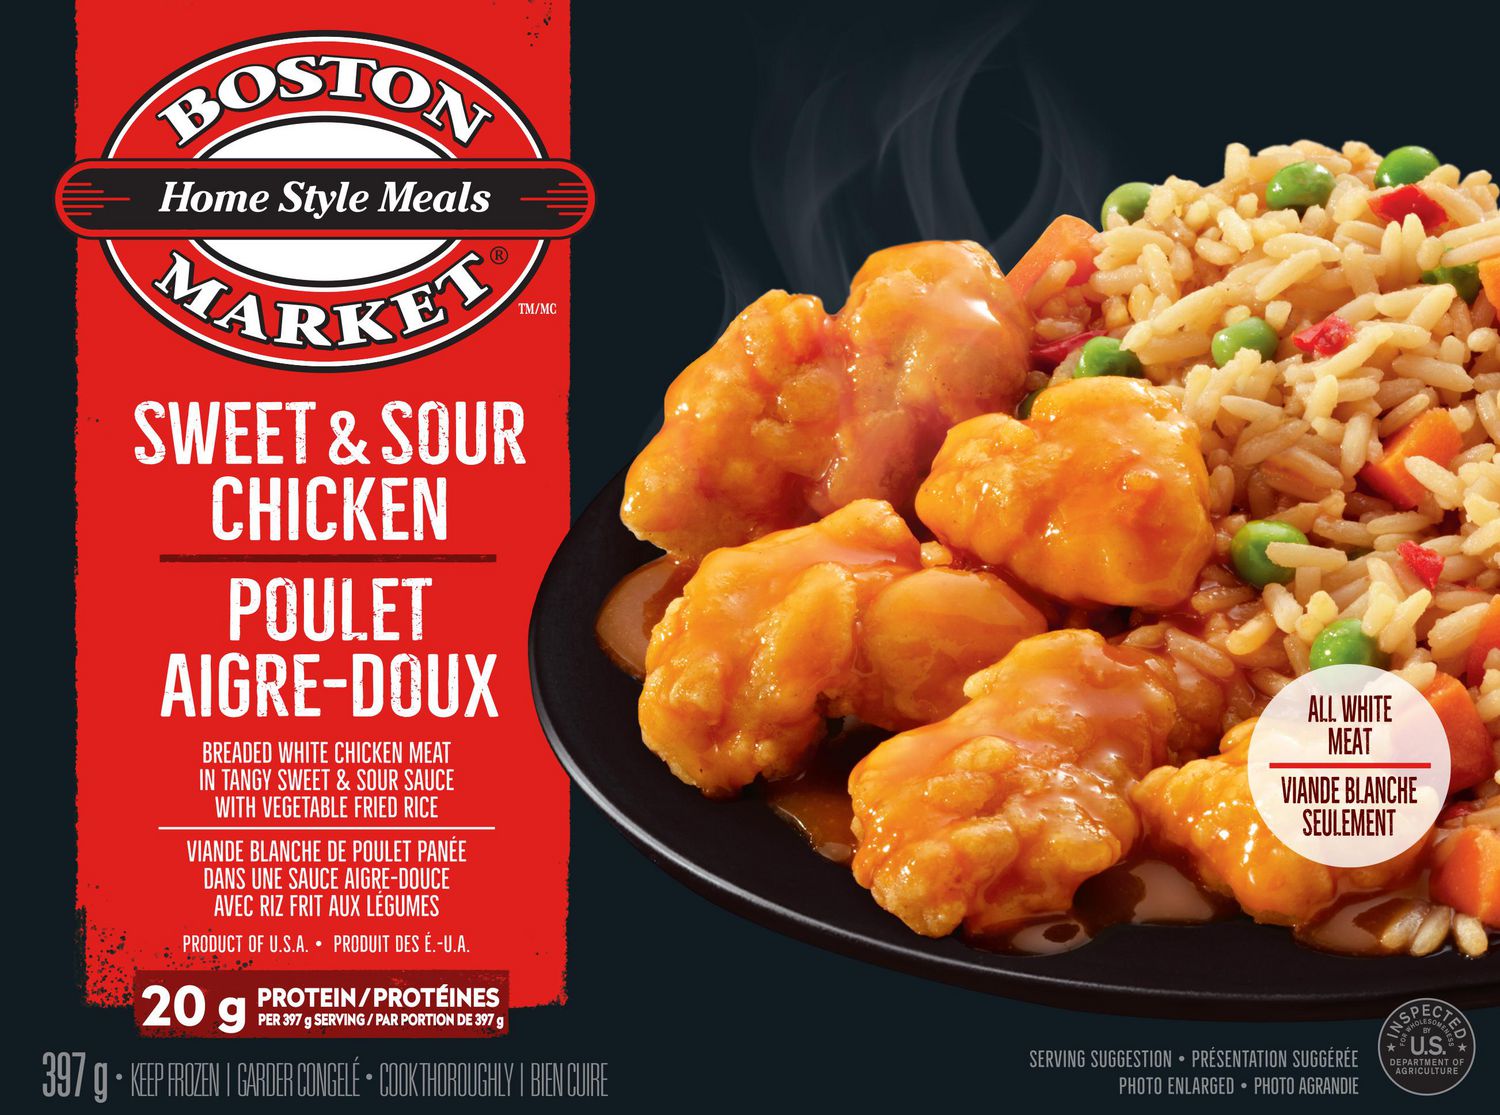 boston market sweet and sour chicken - Boston Home Style Meals Market Sweet & Sour Chicken Poulet AigreDoux Breaded White Chicken Meat In Tangy Sweet & Sour Sauce With Vegetable Fried Rice Viande Blanche De Poulet Pane Dans Une Sauce AigreDouce Avec Riz F